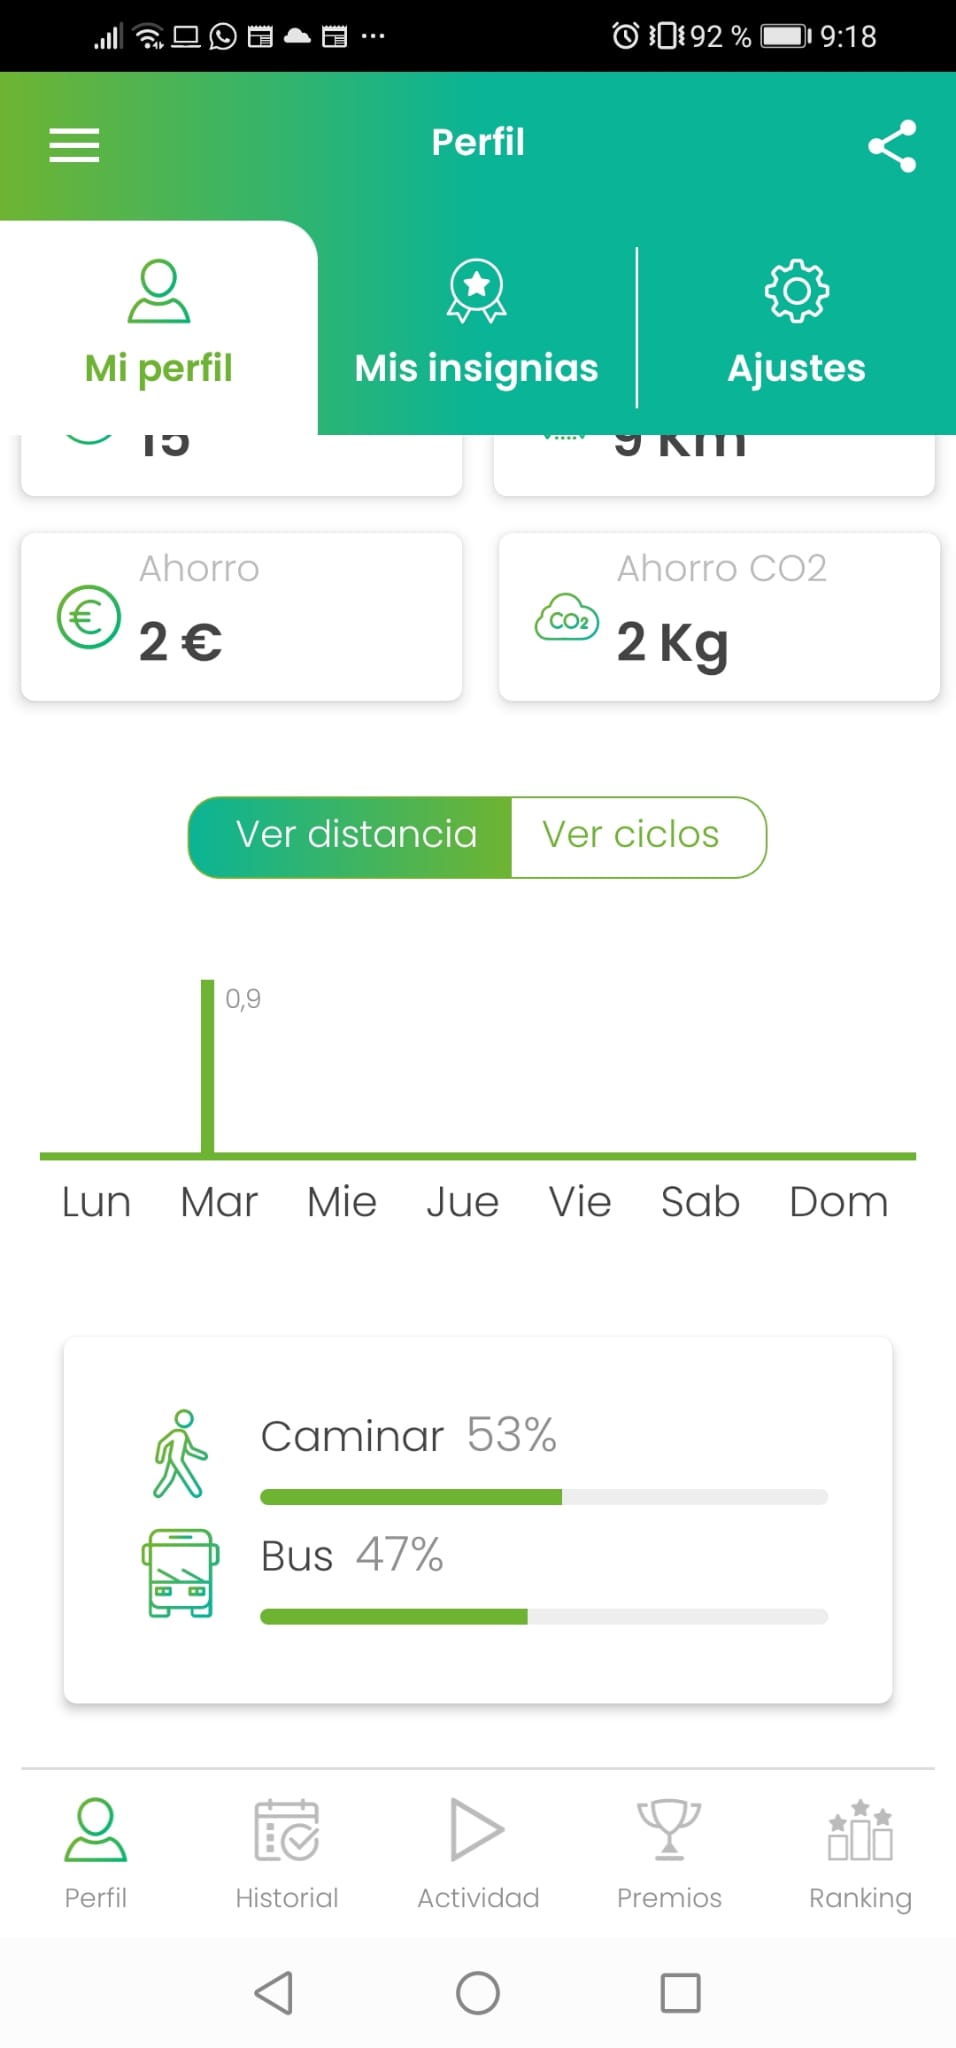 It shows the user's profile with some statistics of the trips.